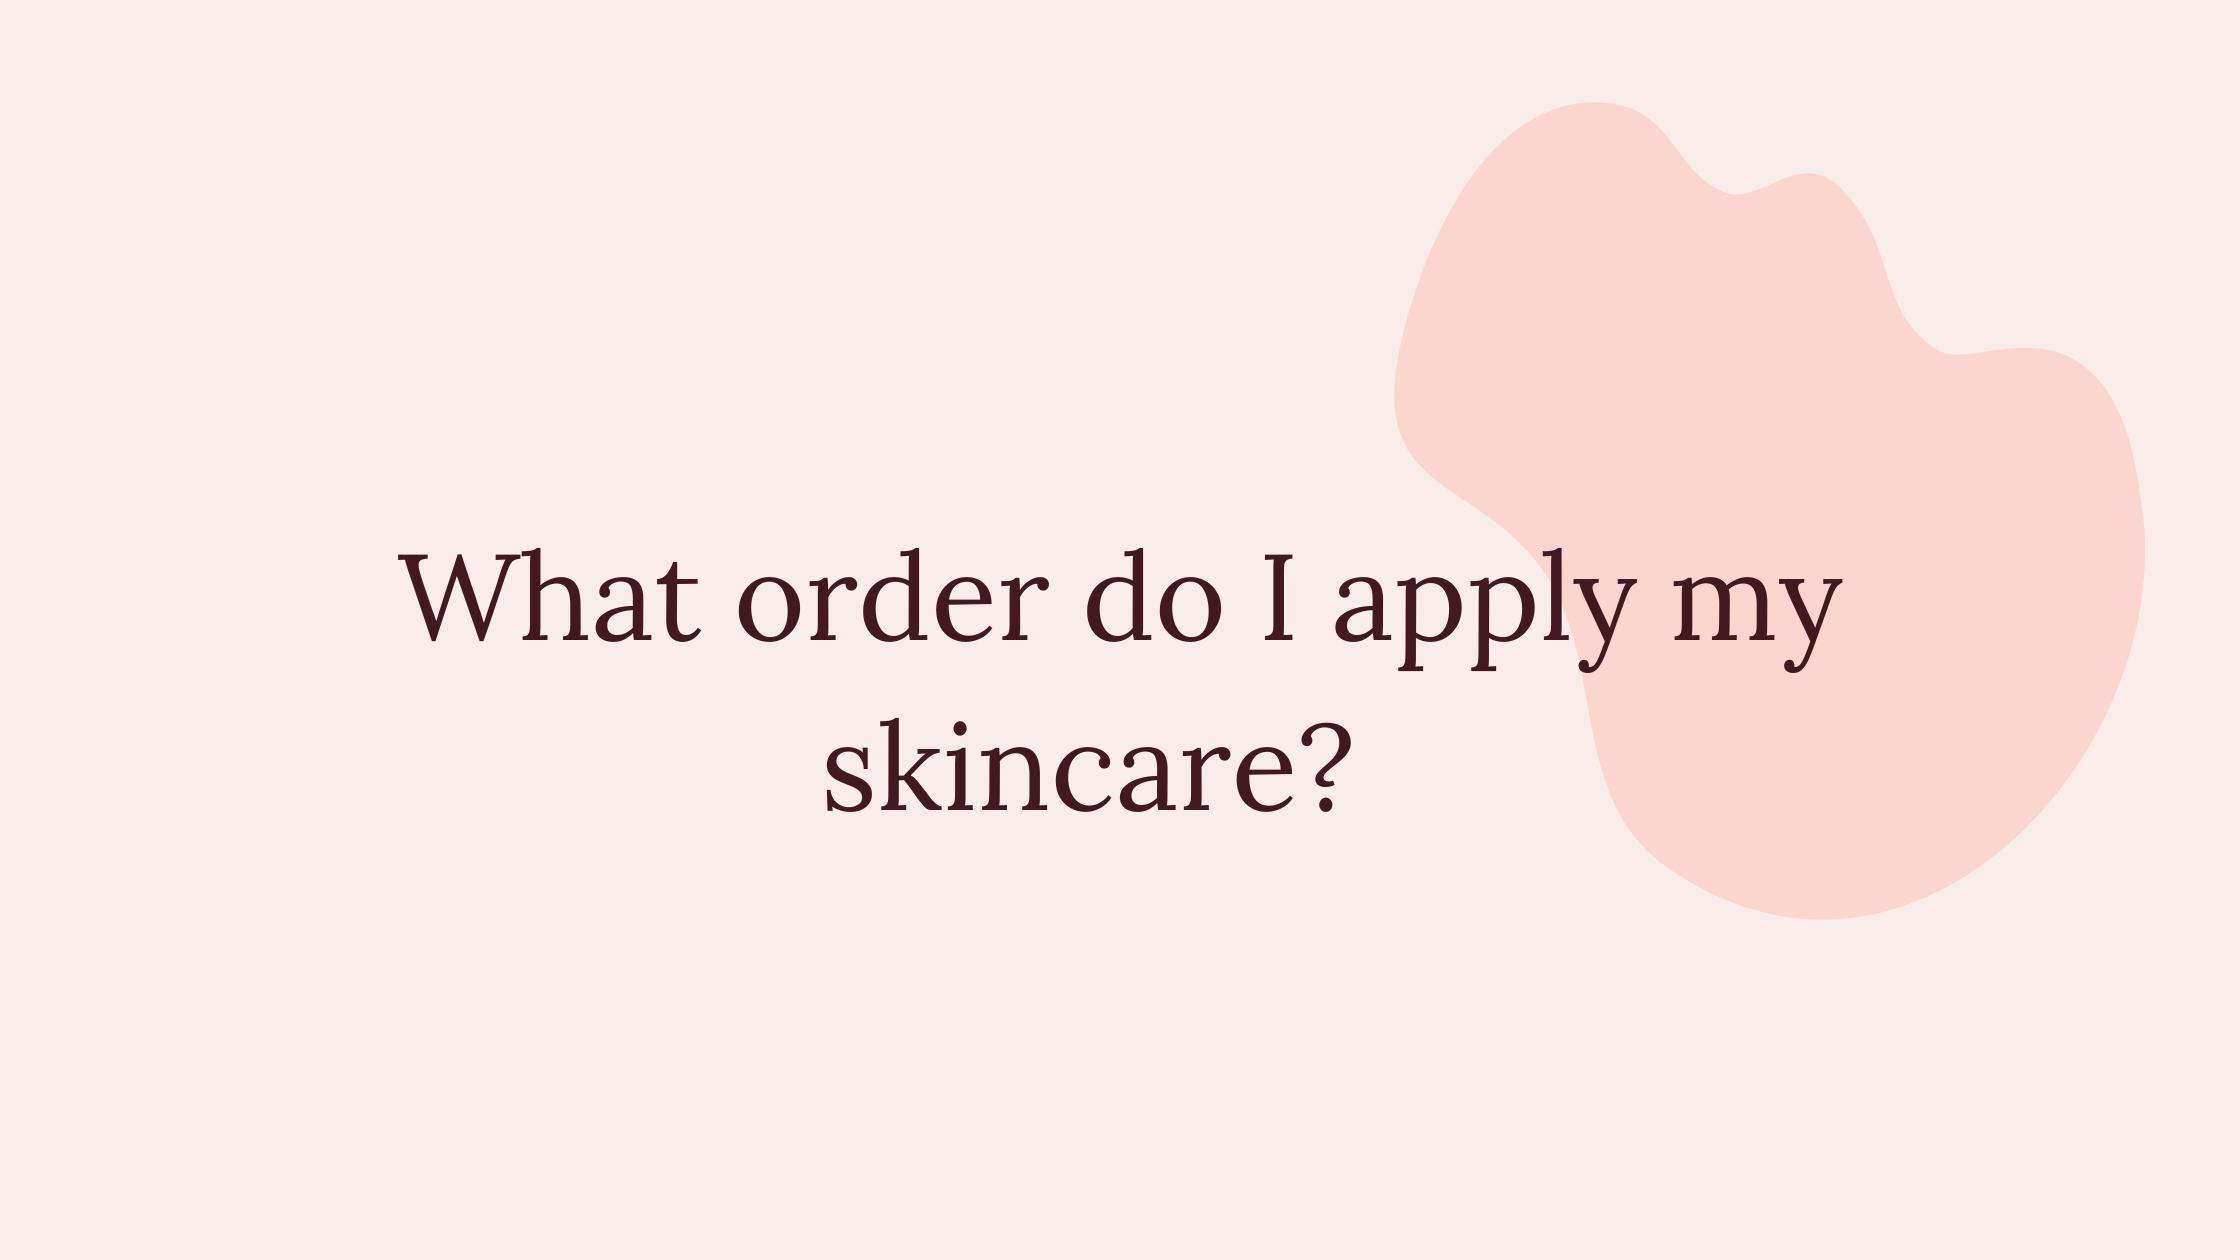 When It Comes To Anti-Ageing, Is There A Correct Order To Apply Skincare?